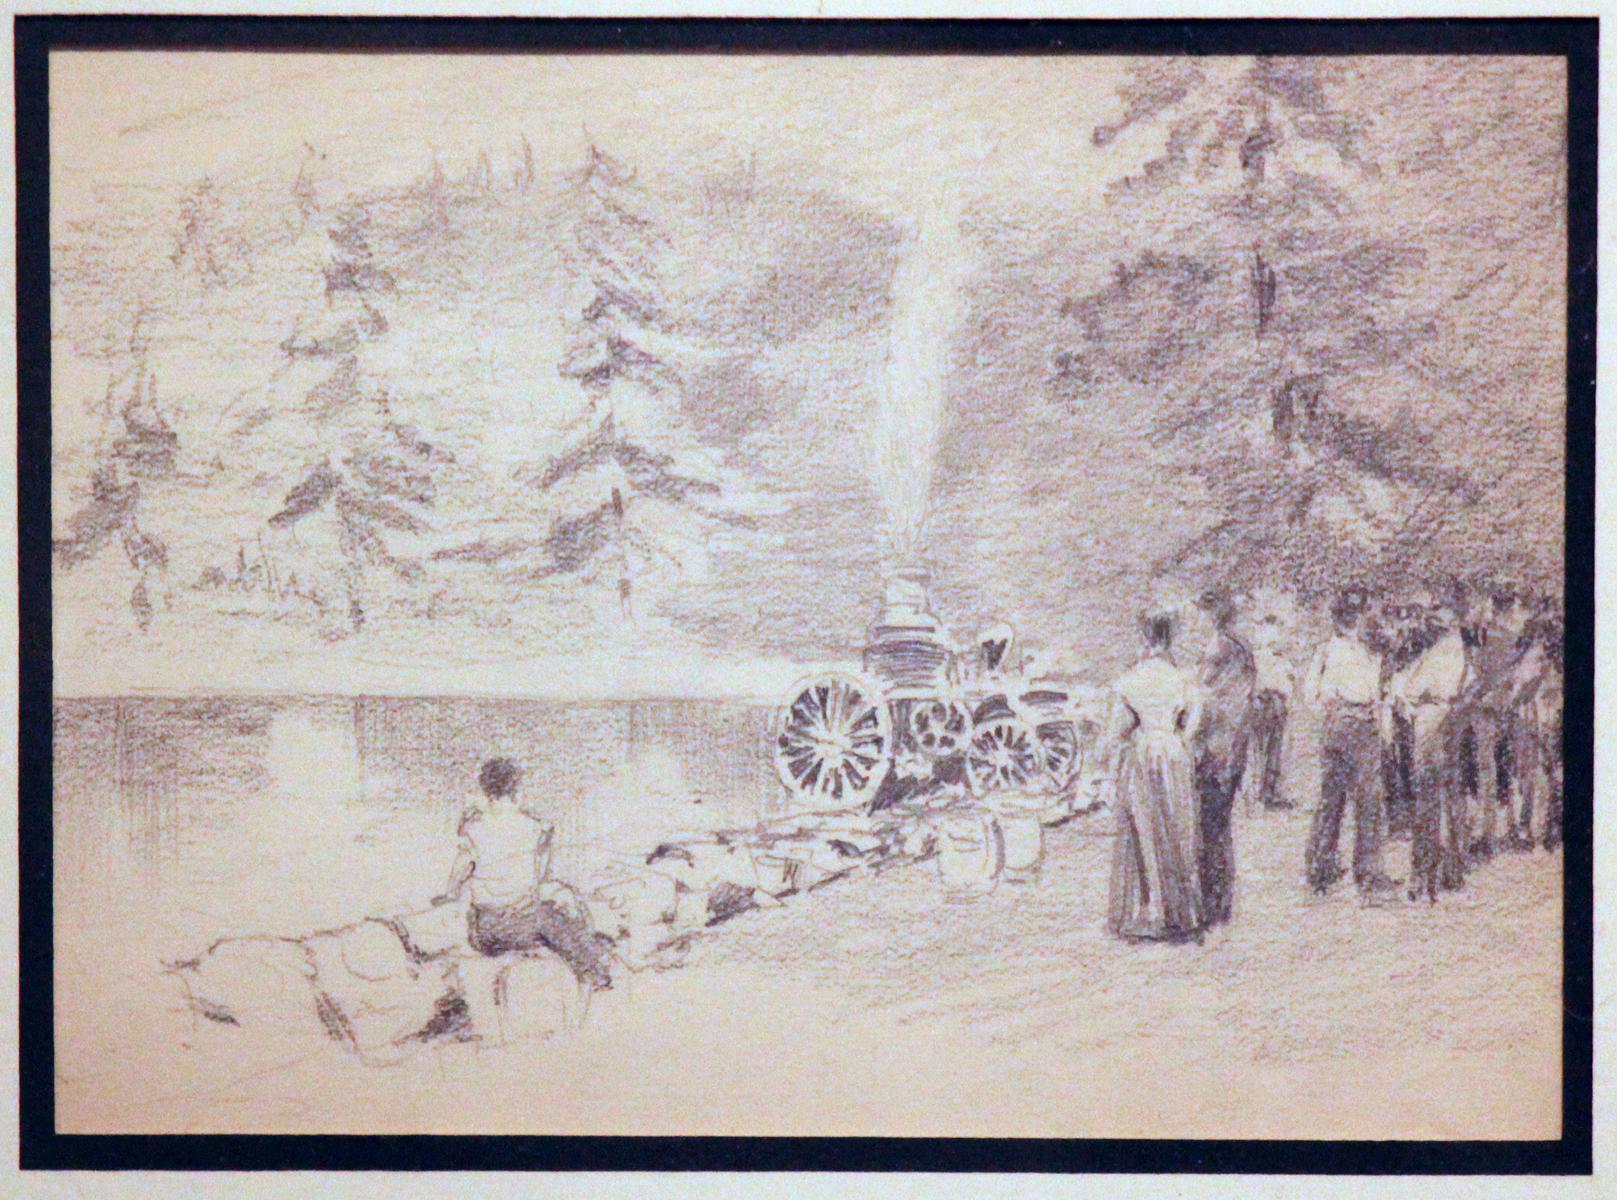 Figures and Firetruck, American Impressionist, Miniature Pencil Drawing, 1899 - Art by Henry Bayley Snell